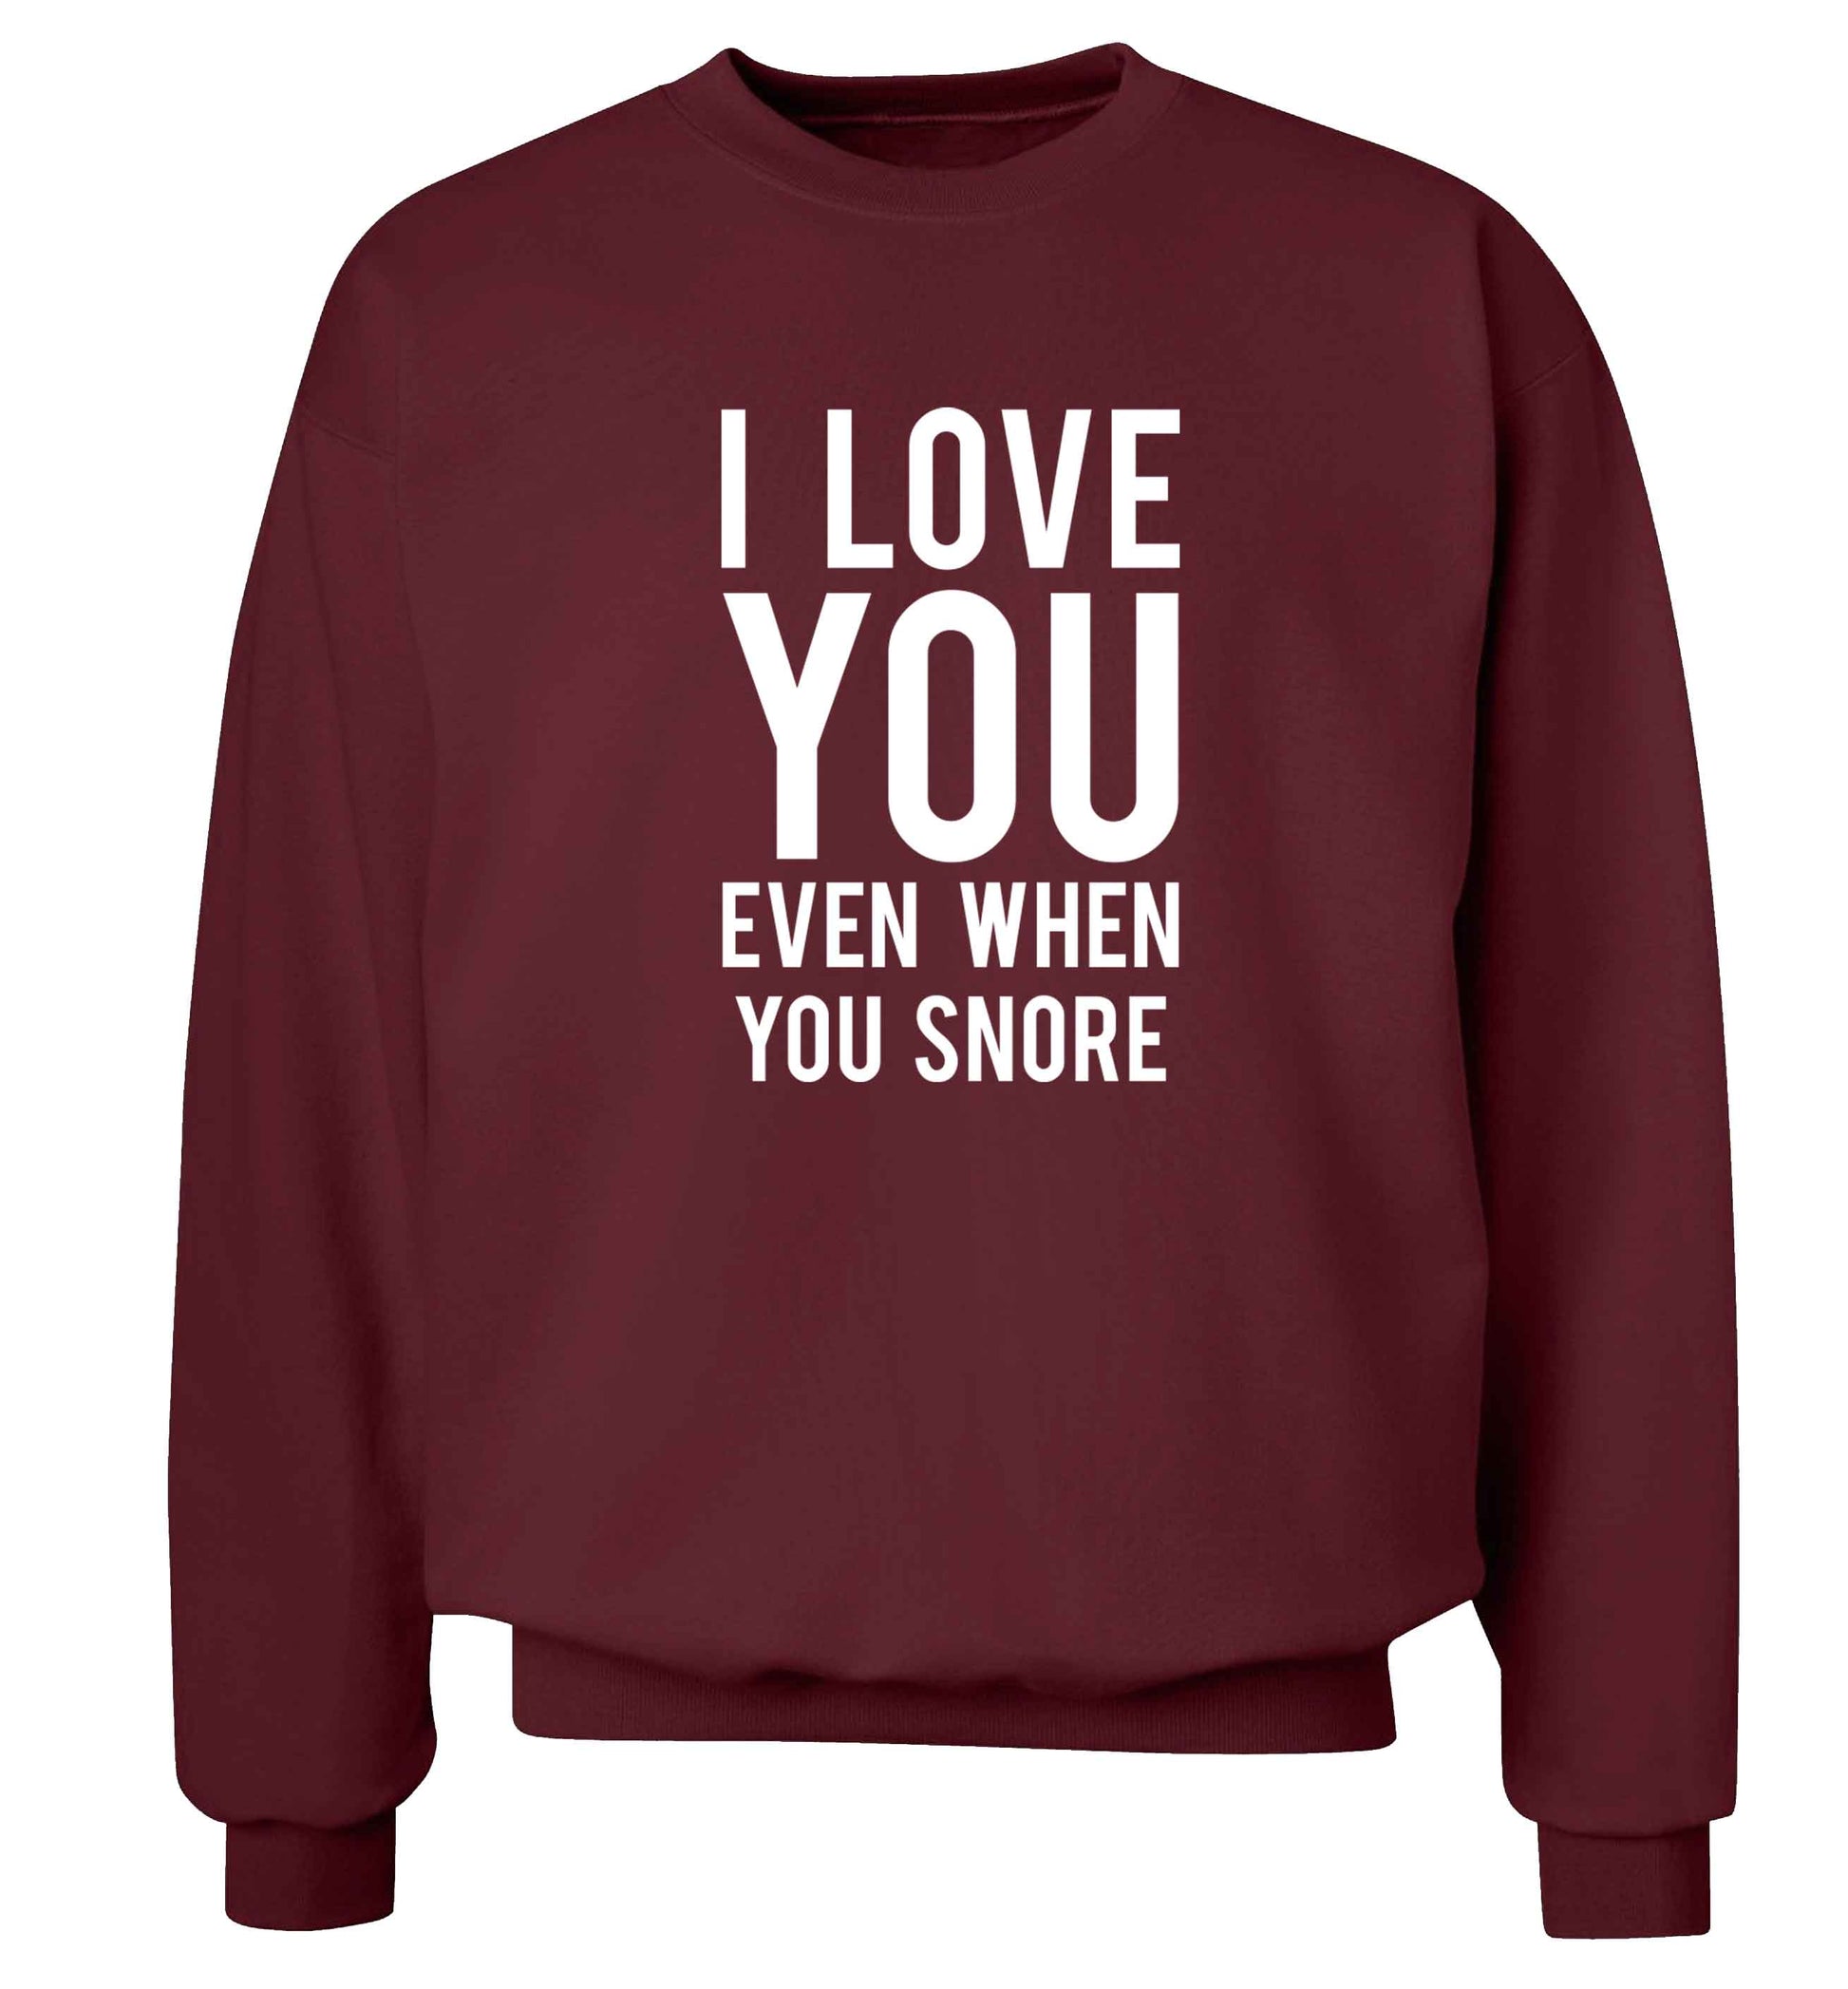 I love you even when you snore adult's unisex maroon sweater 2XL